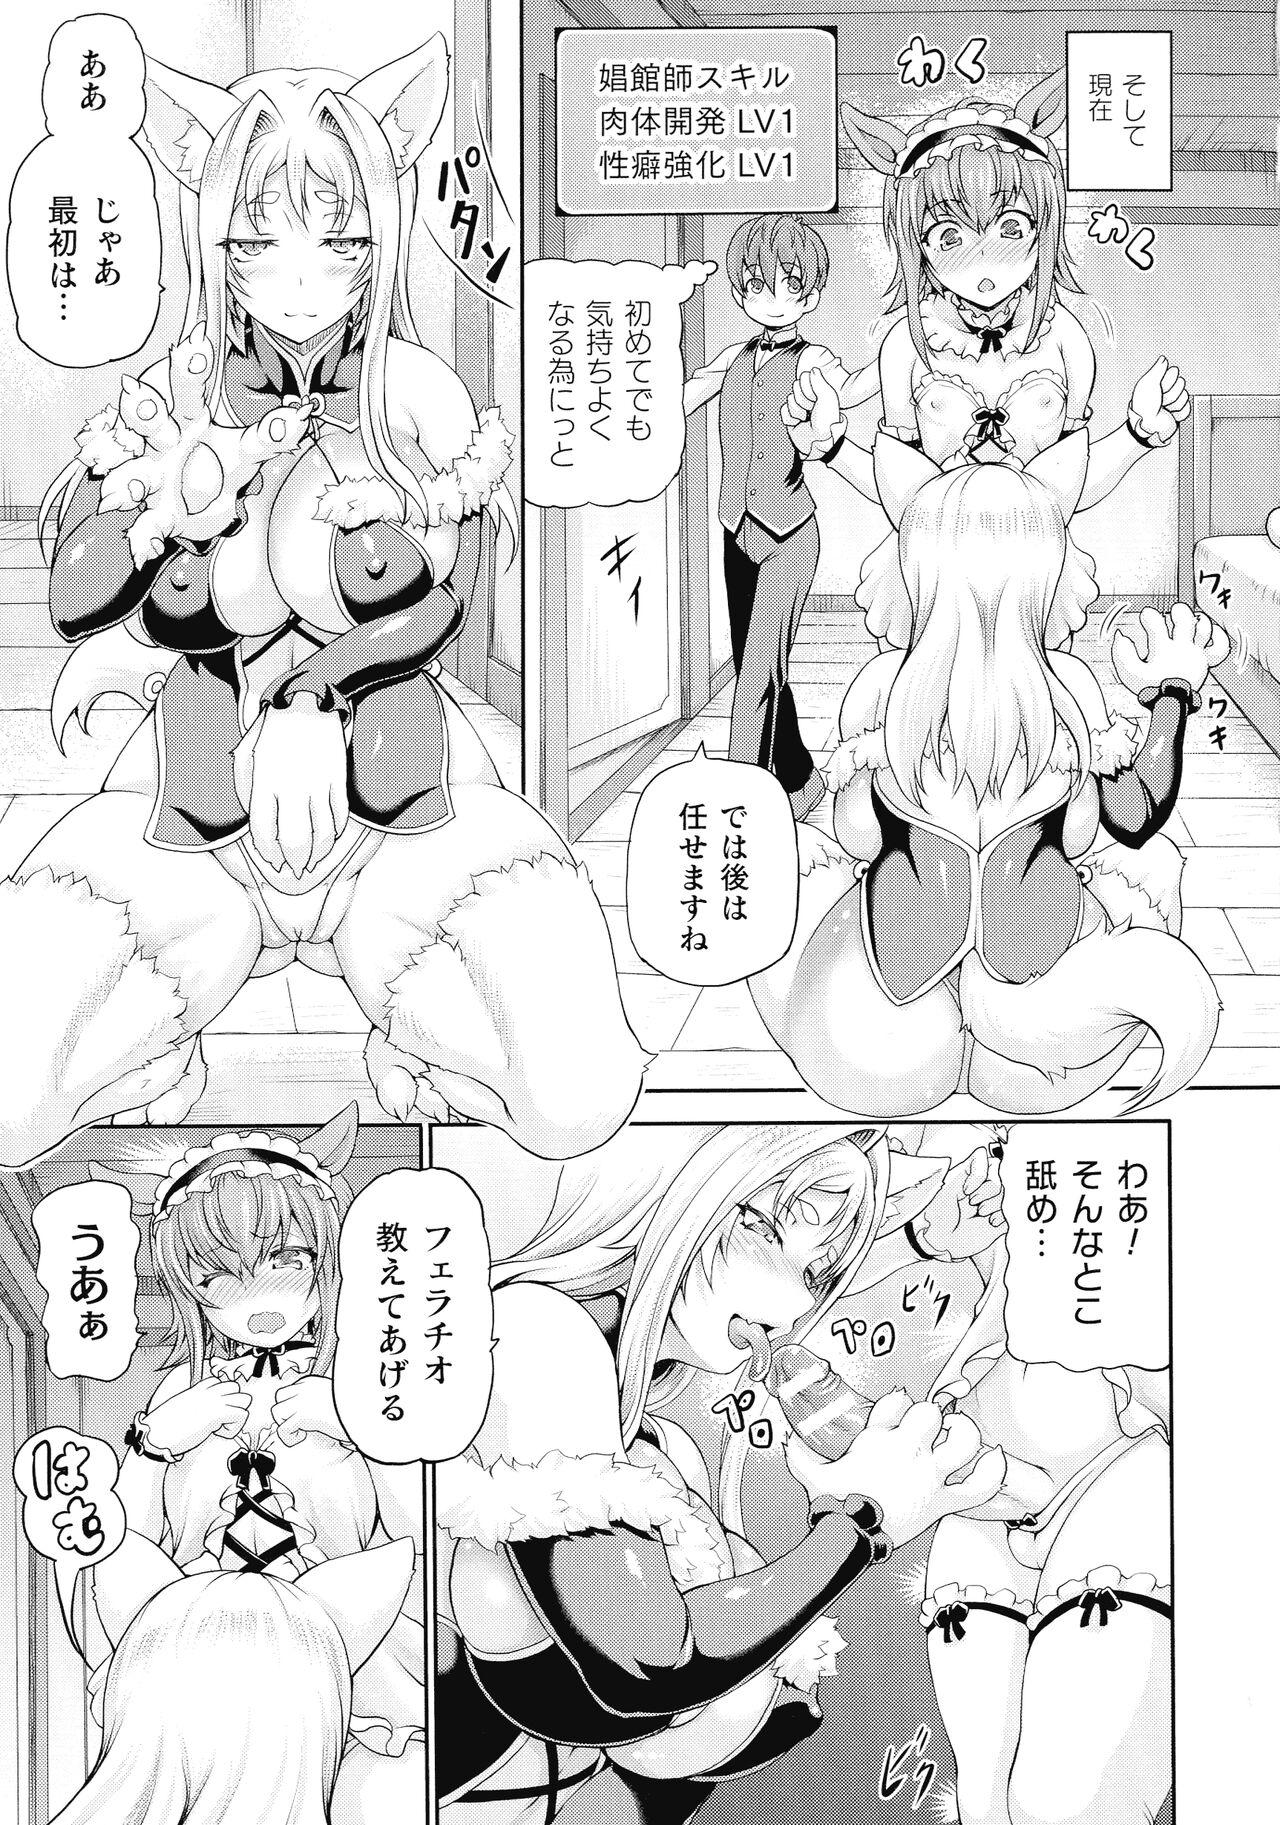 Isekai Shoukan 3 - Brothel in Another World 62